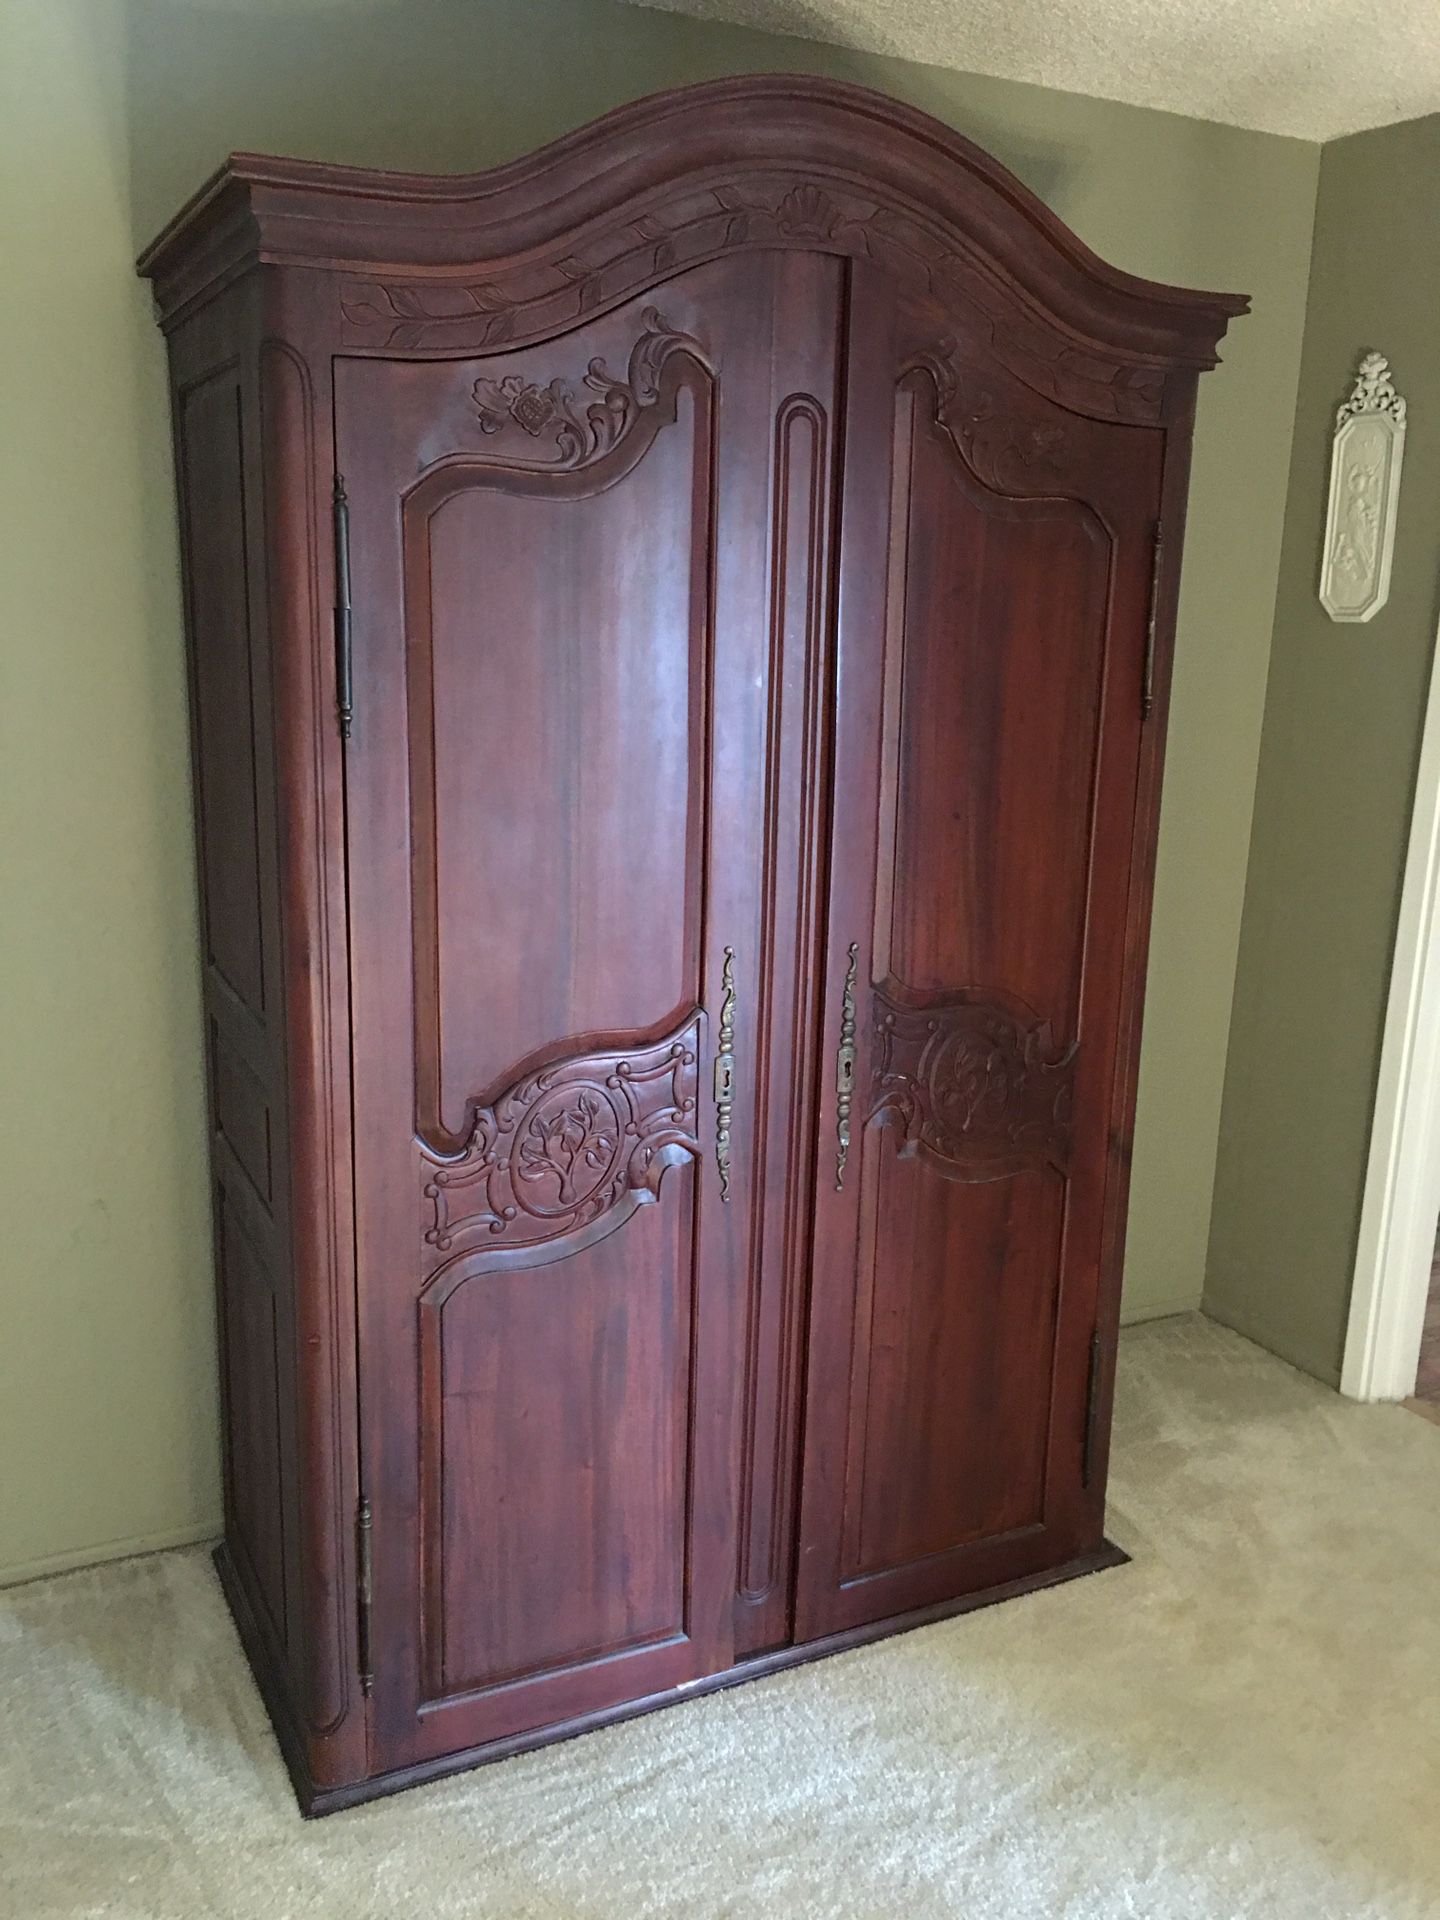 Vintage Armoire for extra Clothing storage